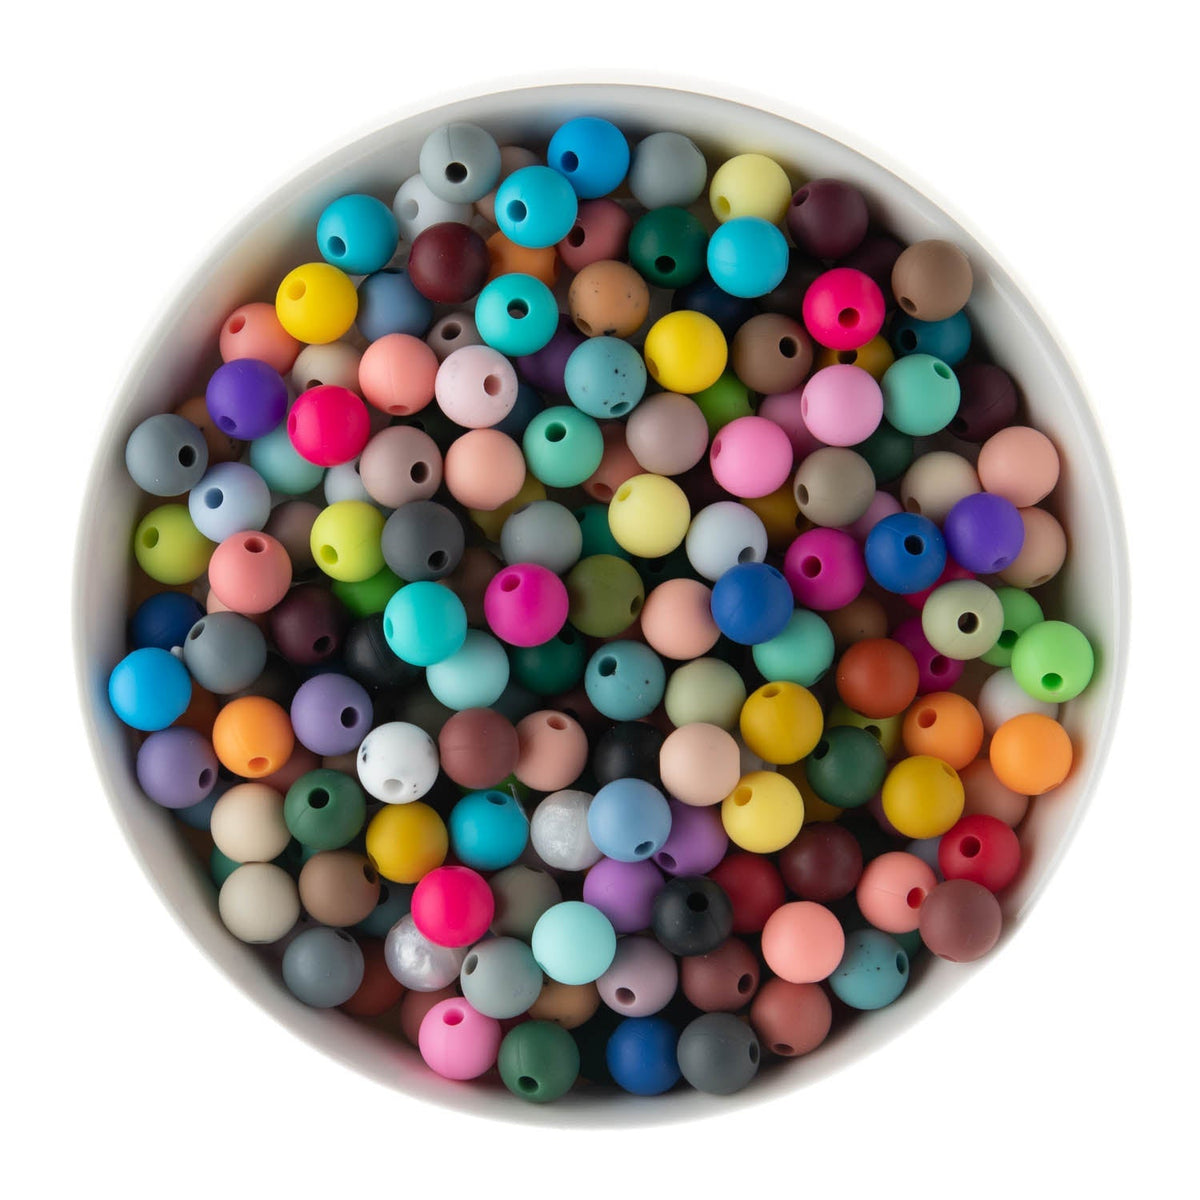 84pcs Silicone Beads Kit,9 Colors Silicone Beads for Keychain Making,15mm  Round,14mm Polygonal Silicone Beads,16mm Wooden Beads,with 2m Lanyard,6